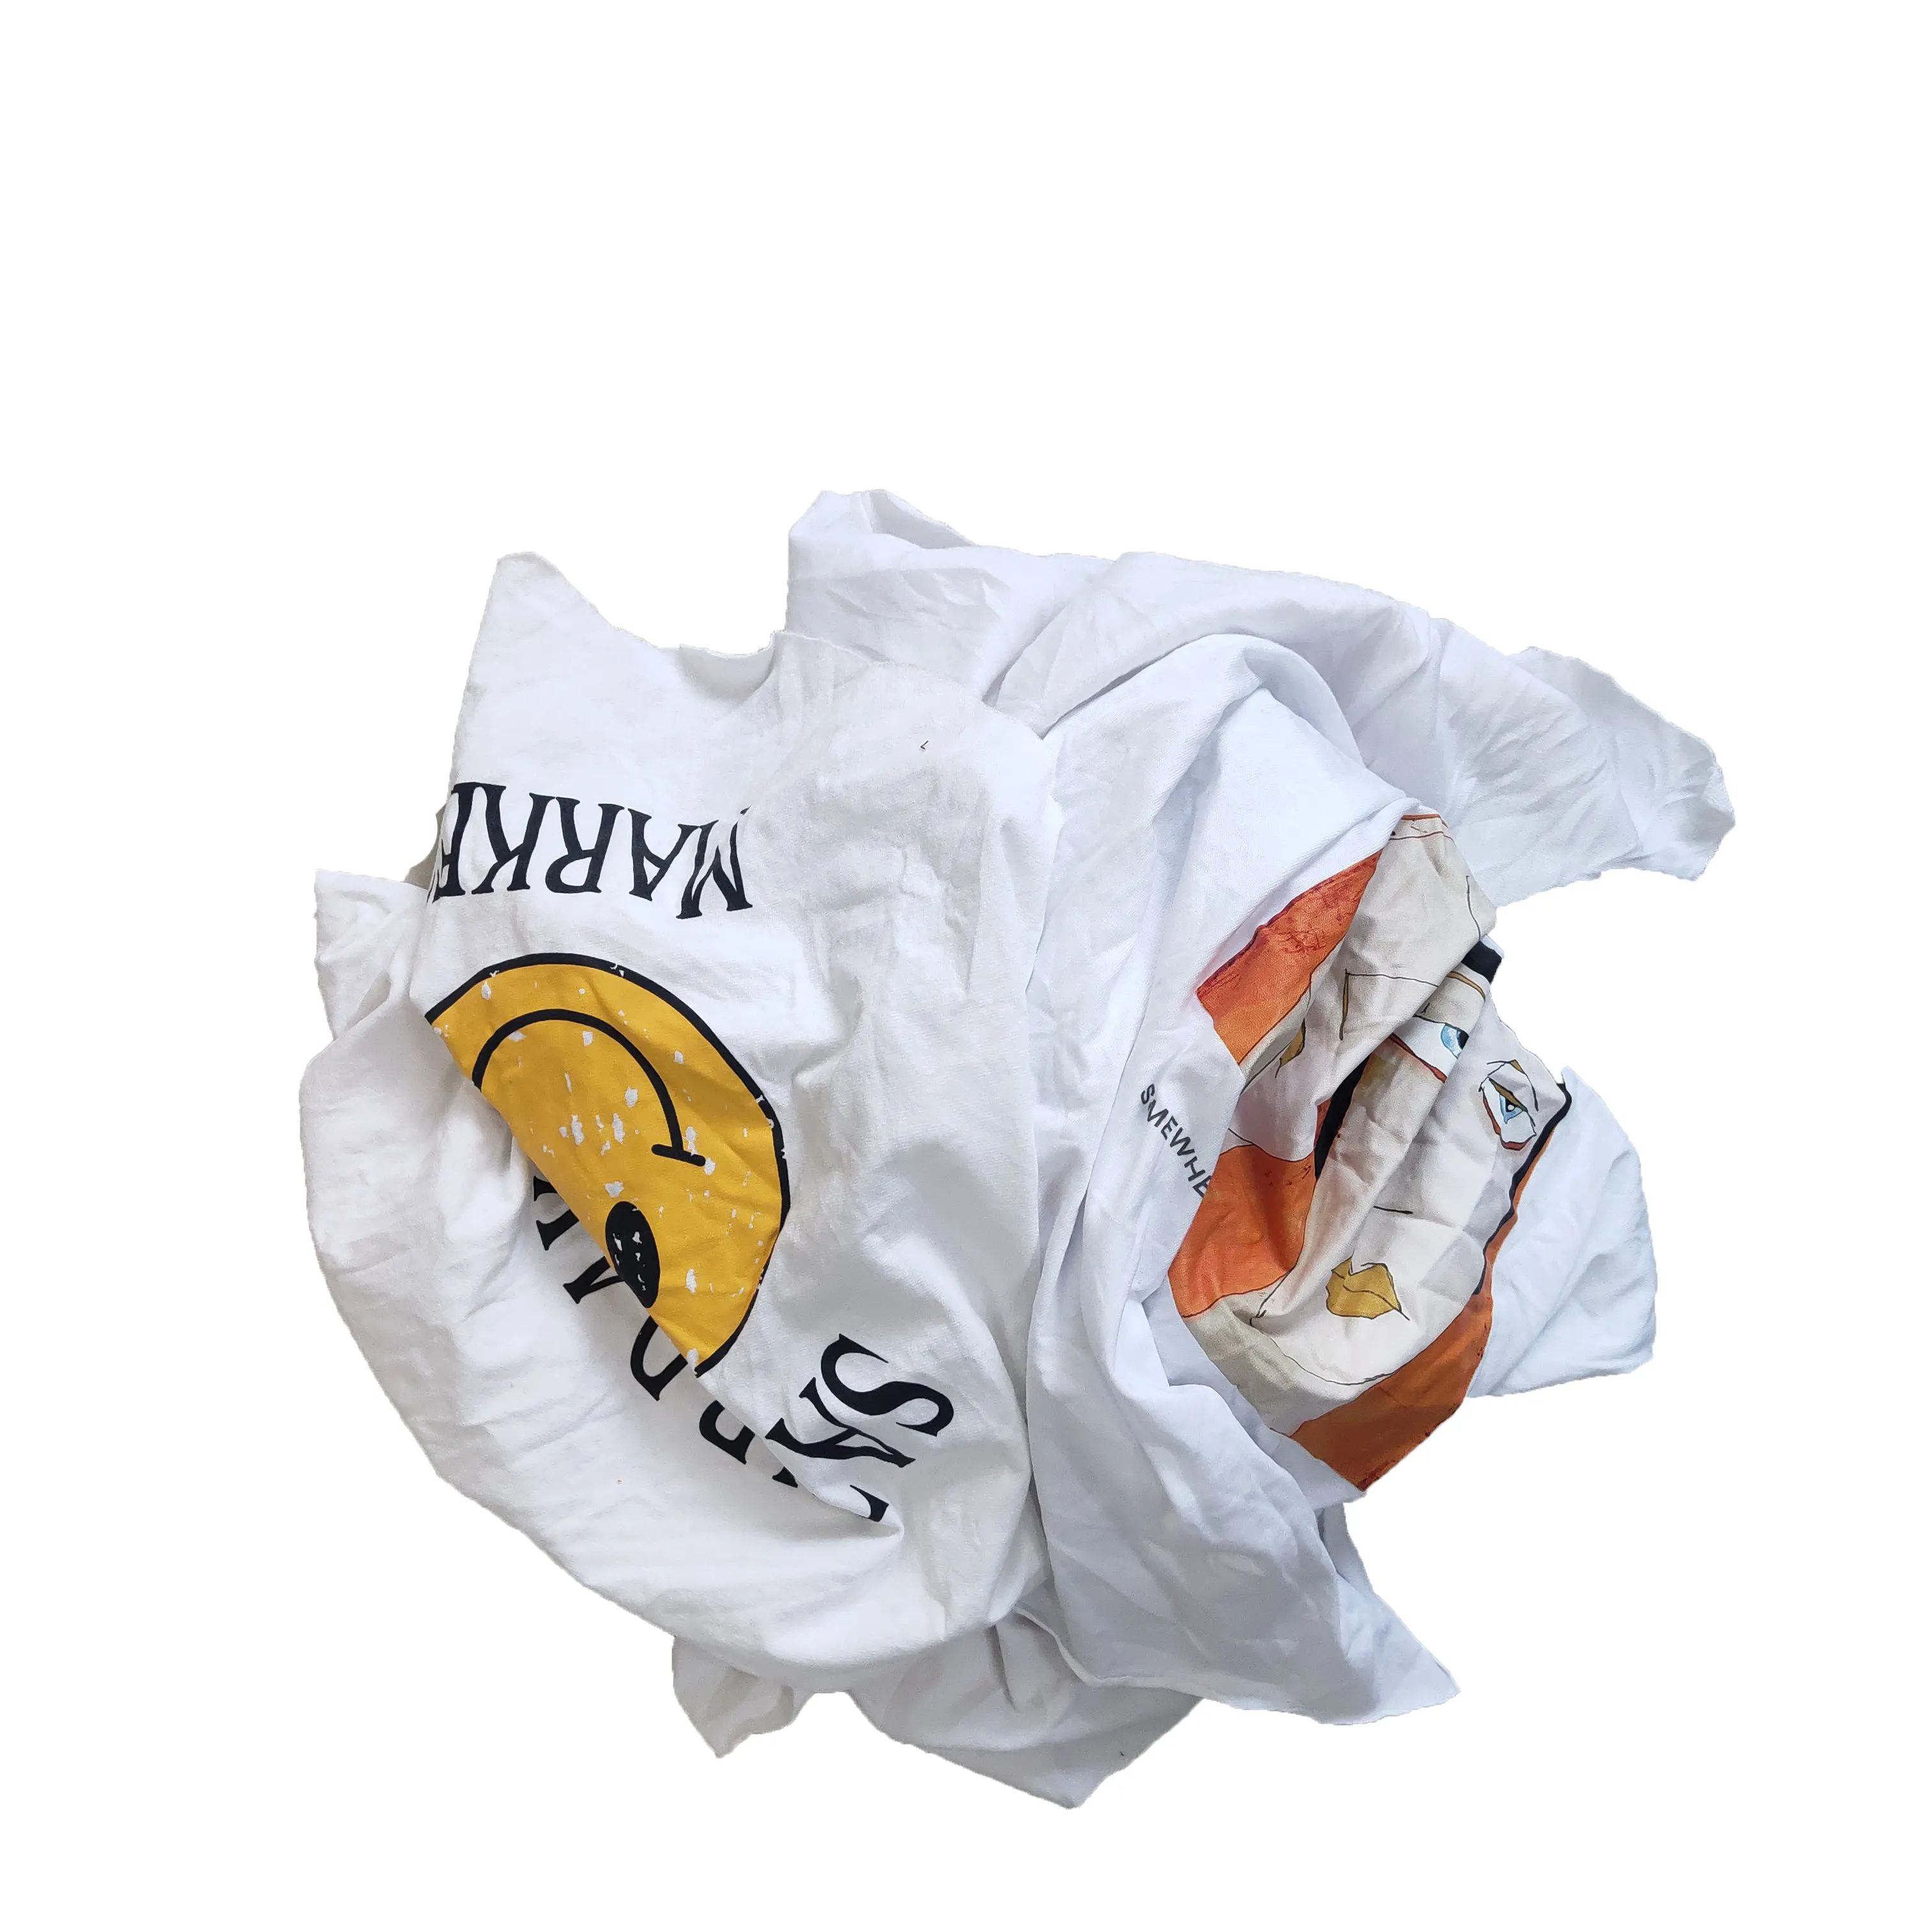 Industrial Using Cleaning Rags Oil Absorbent Printed T shirt Rags Marine Cotton Wiping Rags